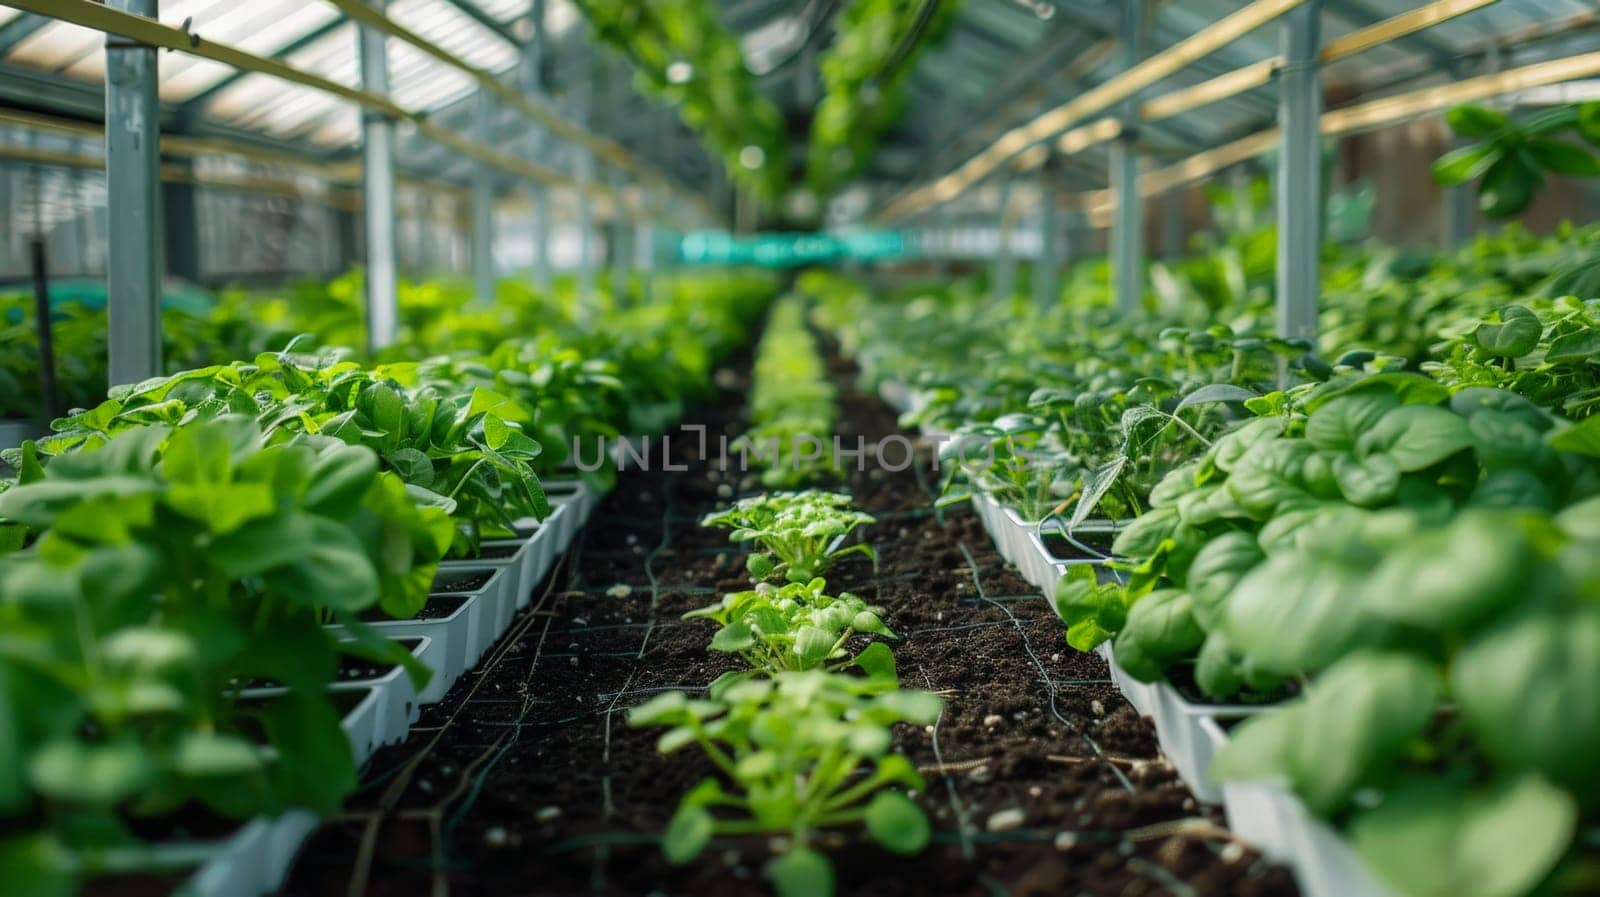 A modern greenhouse filled with veggies, A greenhouse filled with rows of genetically modified plants.